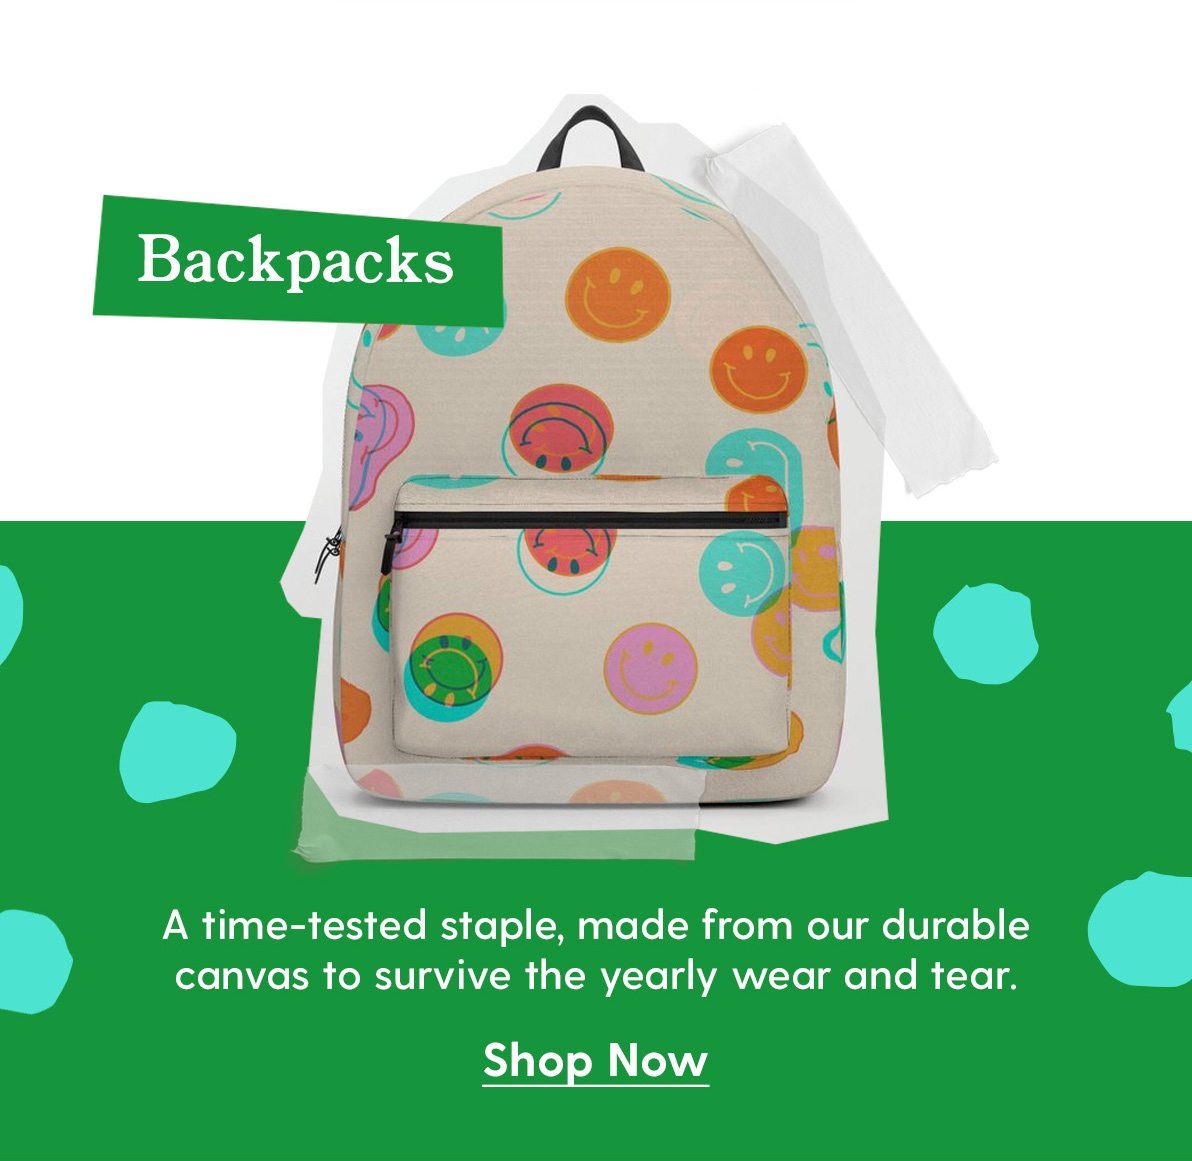 Backpacks A time-tested staple, made from our durable canvas to survive the yearly wear and tear. Shop Now